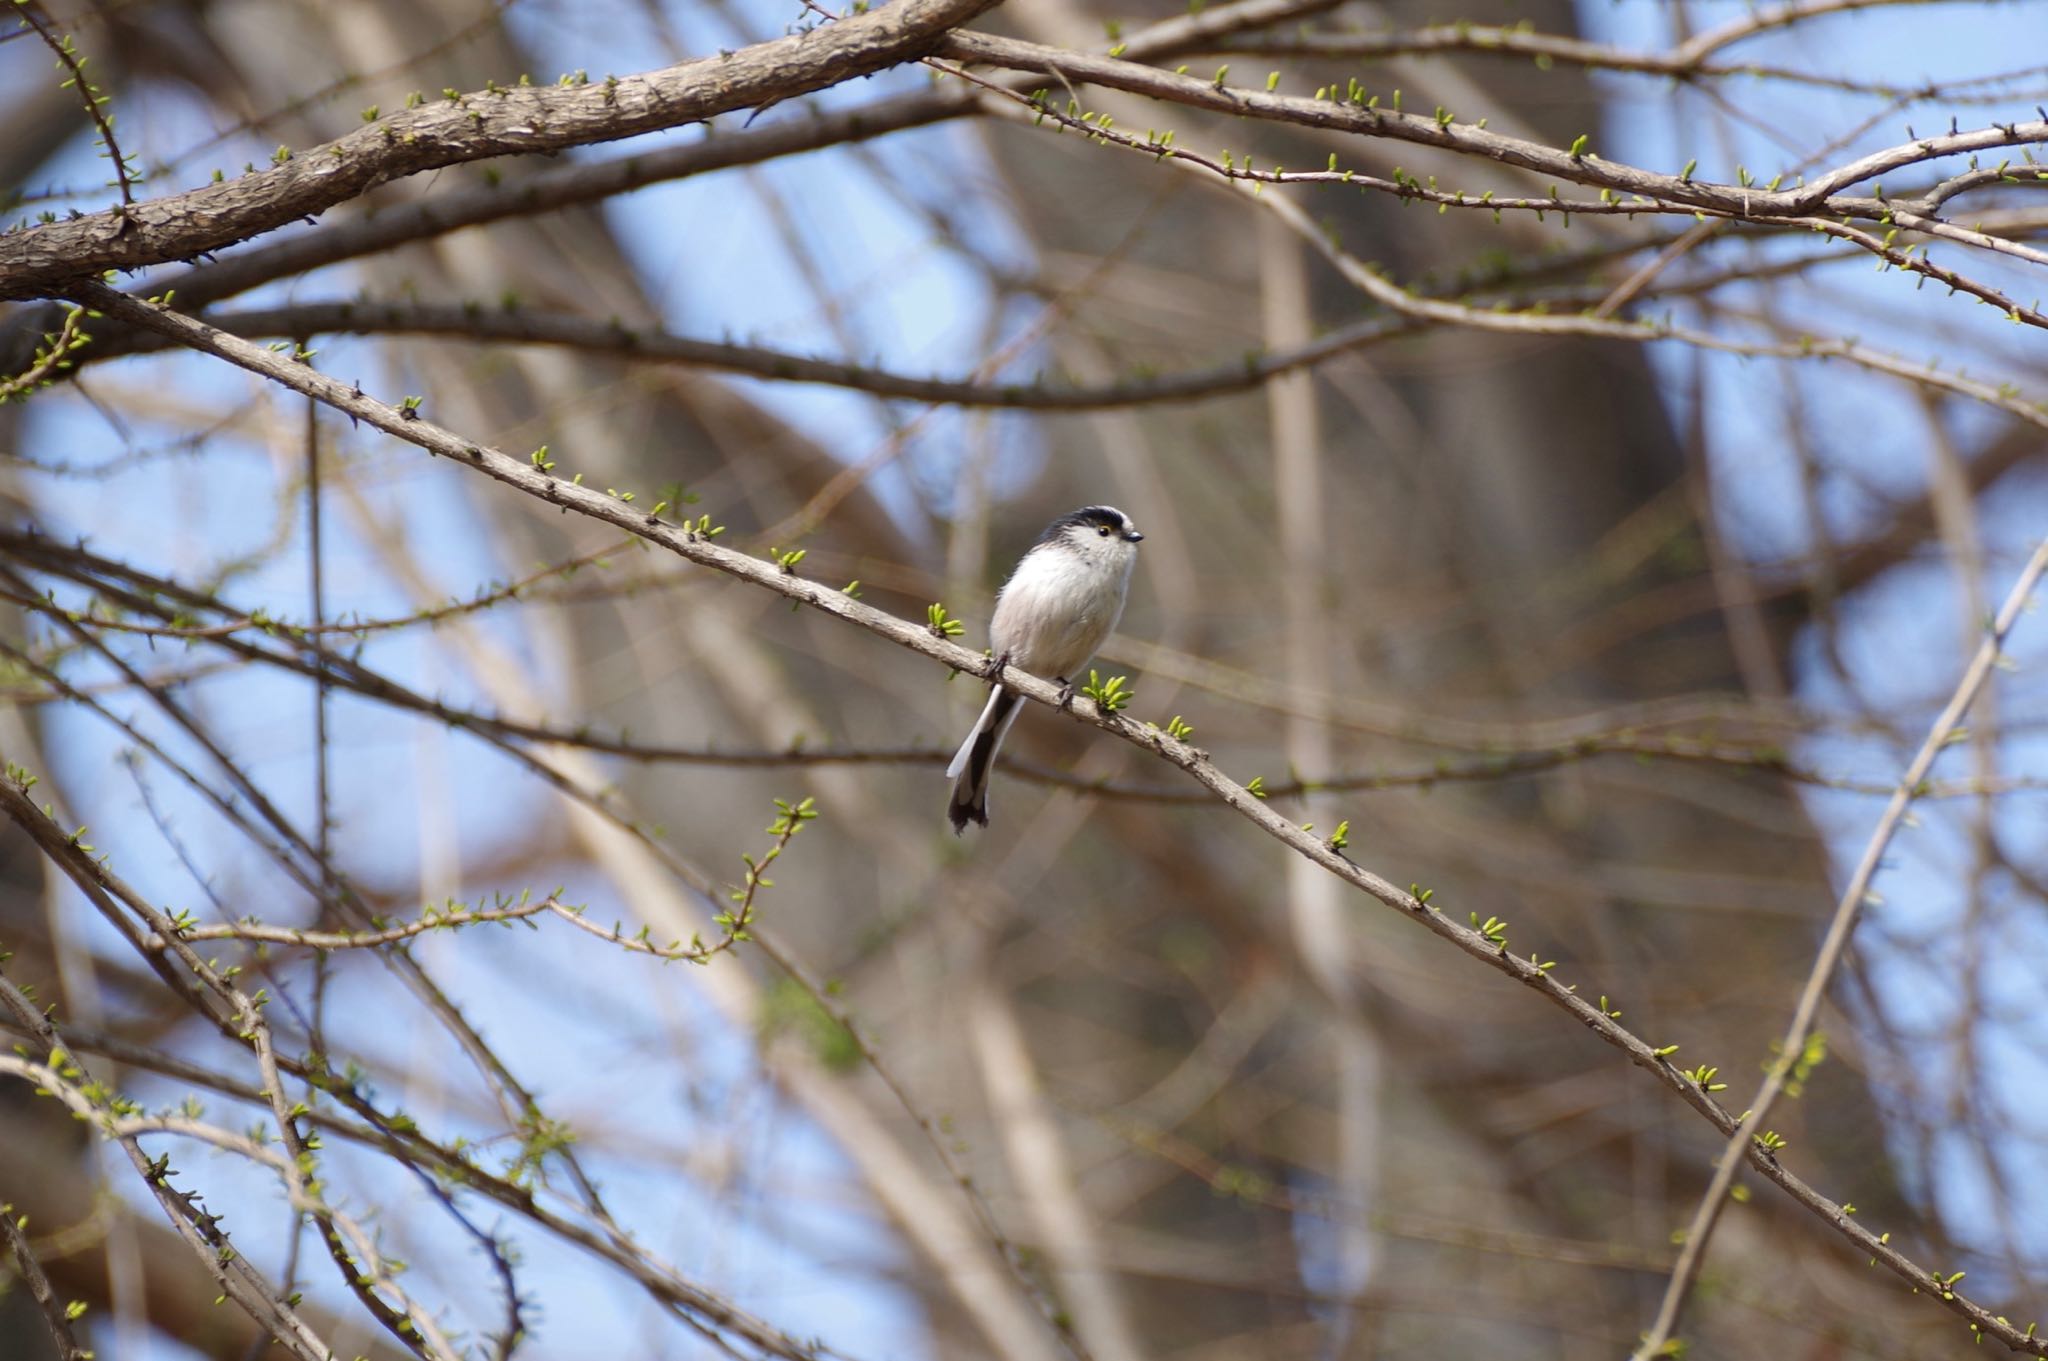 Photo of Long-tailed Tit at 善福寺公園 by amy